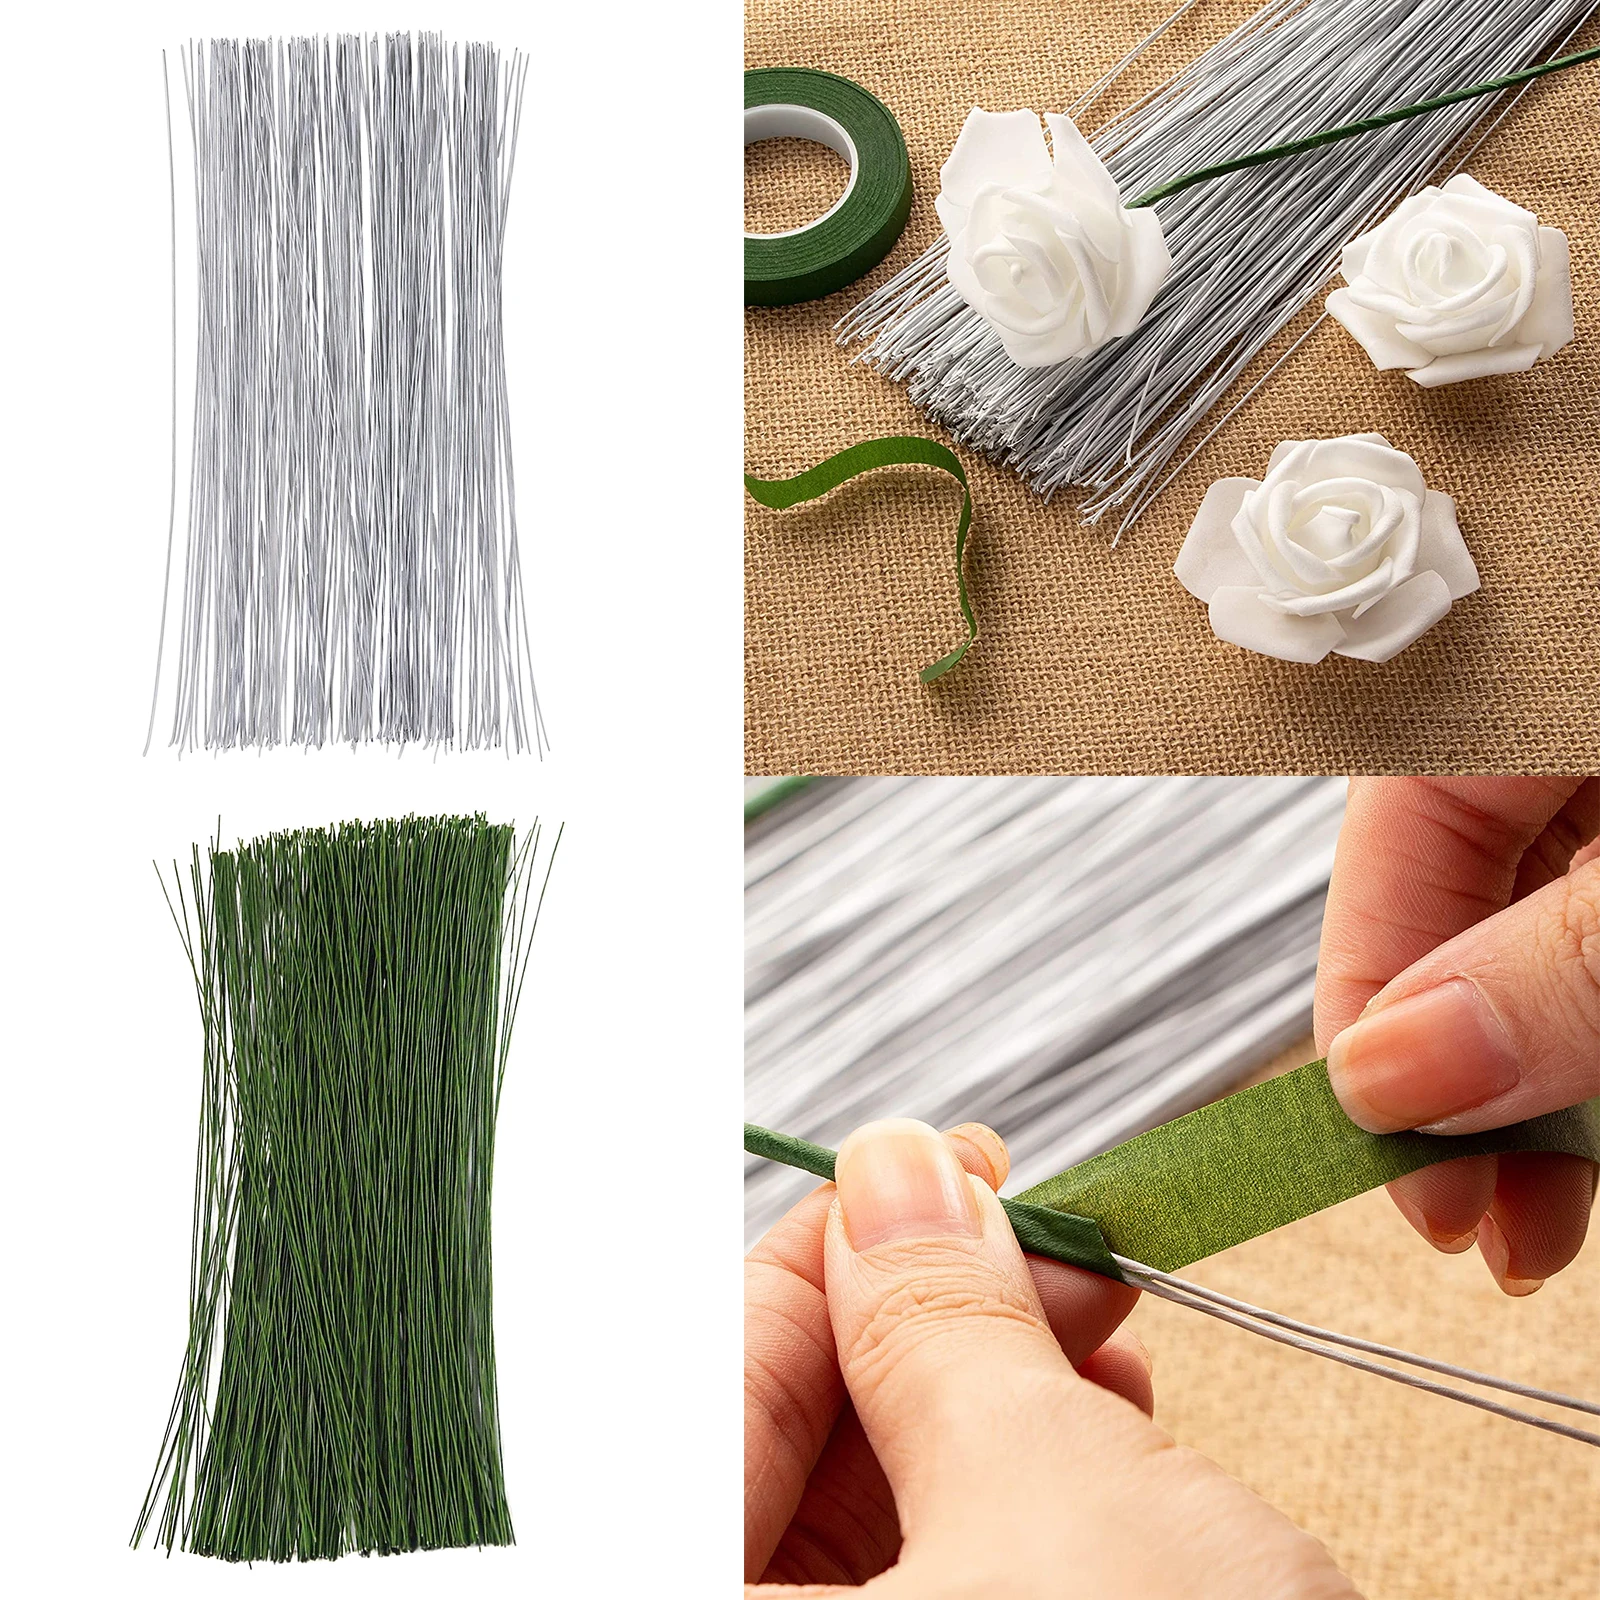 200Pcs/Lot 36CM High Quality Paper Covered Artificial Branches Twigs Iron Wire For DIY Flower Accessory